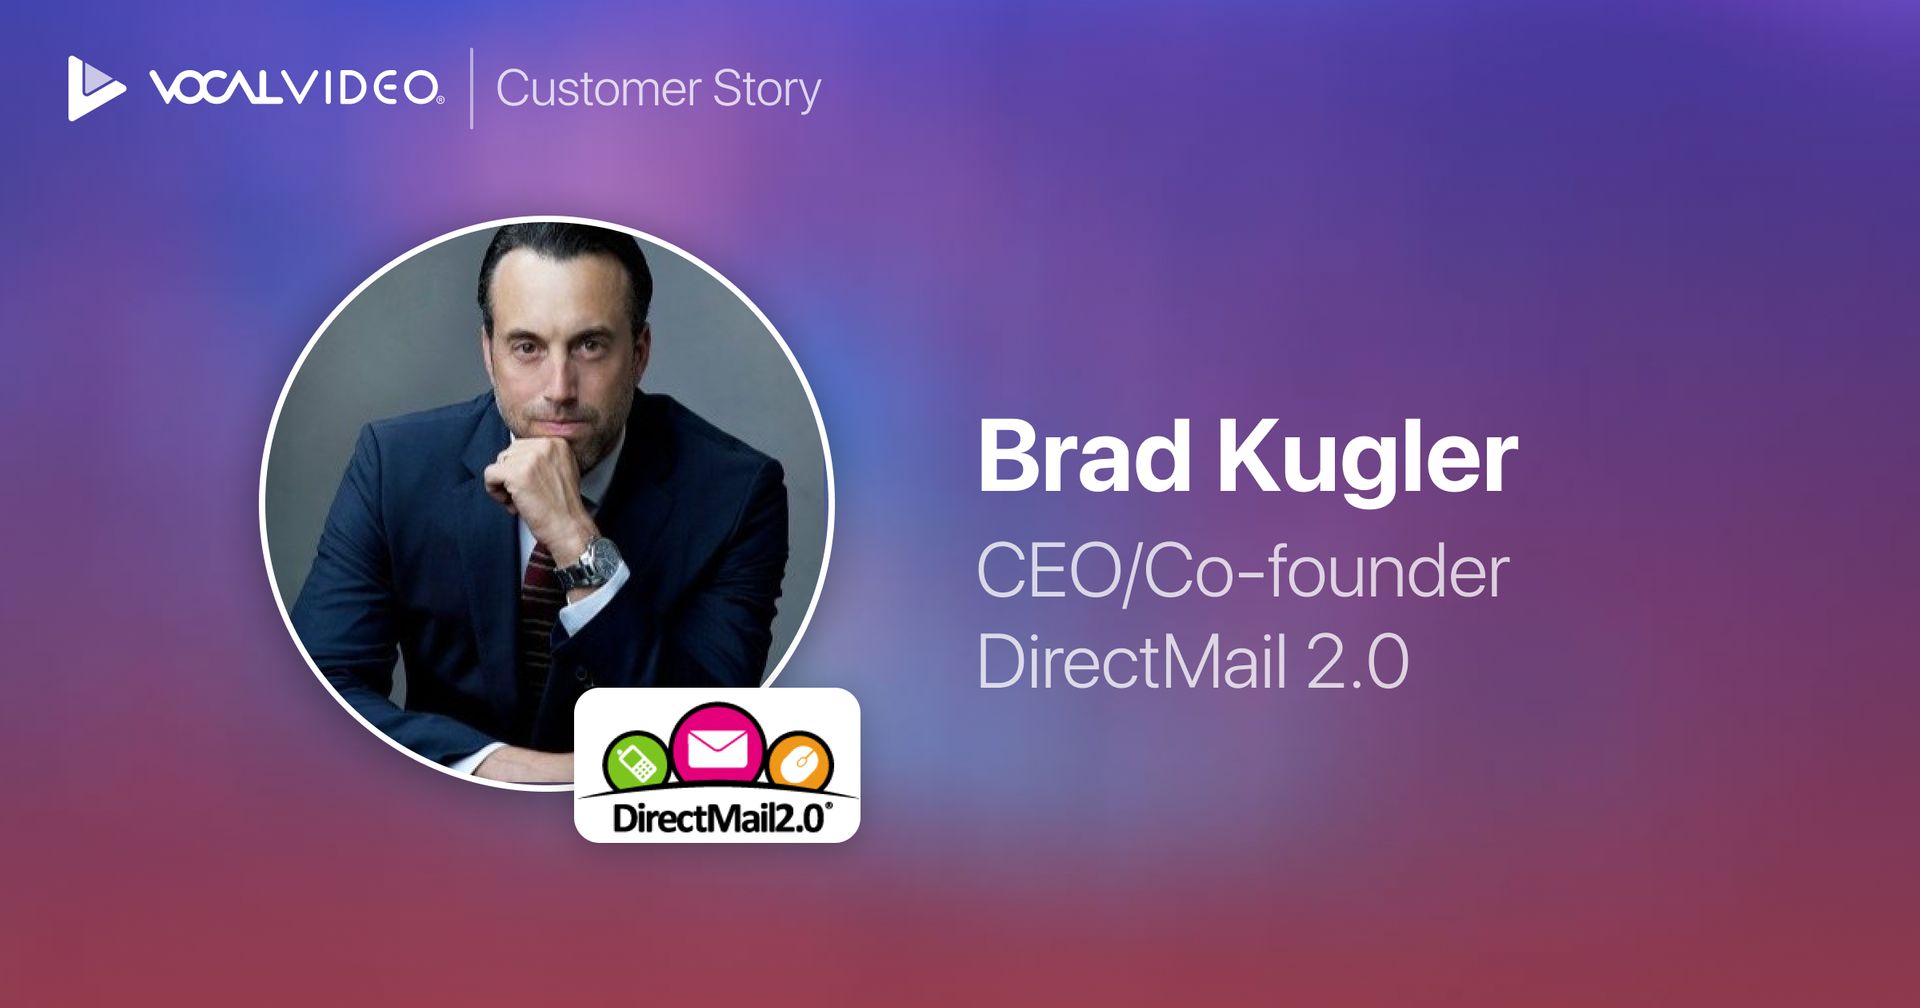 CEO of DirectMail2.0 on how to use Vocal Video for employee, customer, and exec videos